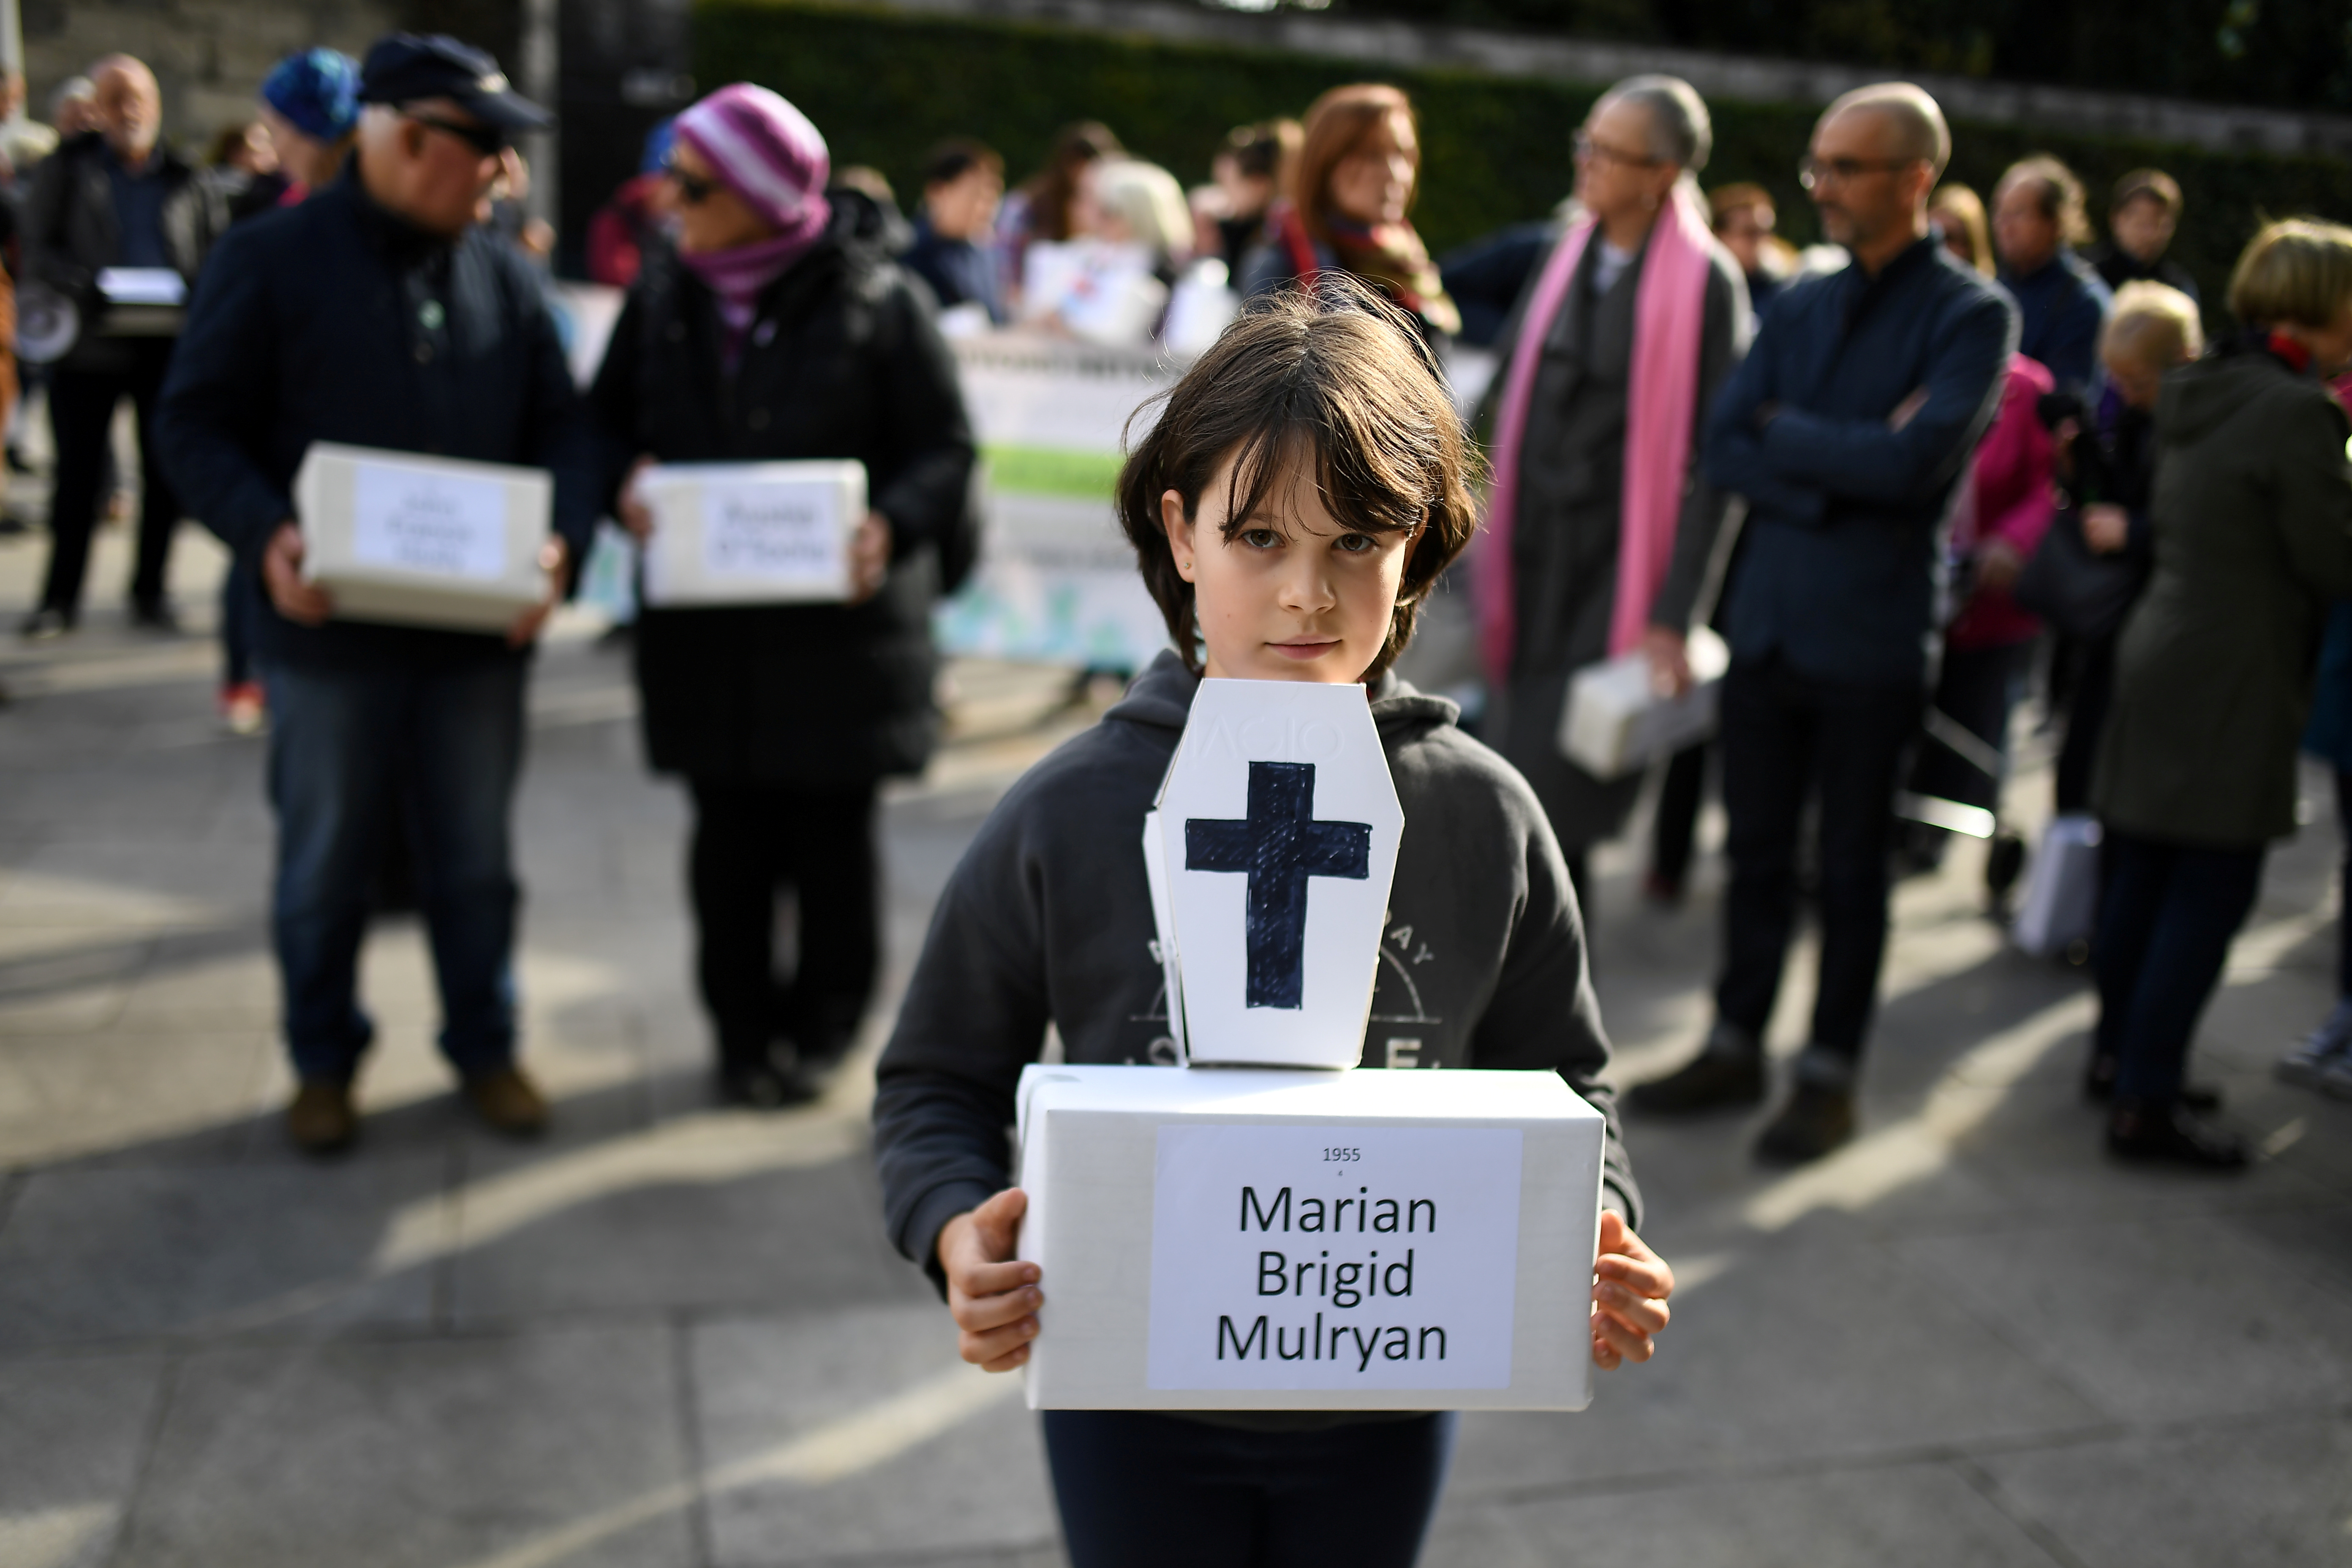 Matilda Kelly holds a funeral box at a funeral procession in remembrance of the bodies of the infants discovered in a septic tank, in 2014, at the Tuam Mother and Baby Home, in Dublin